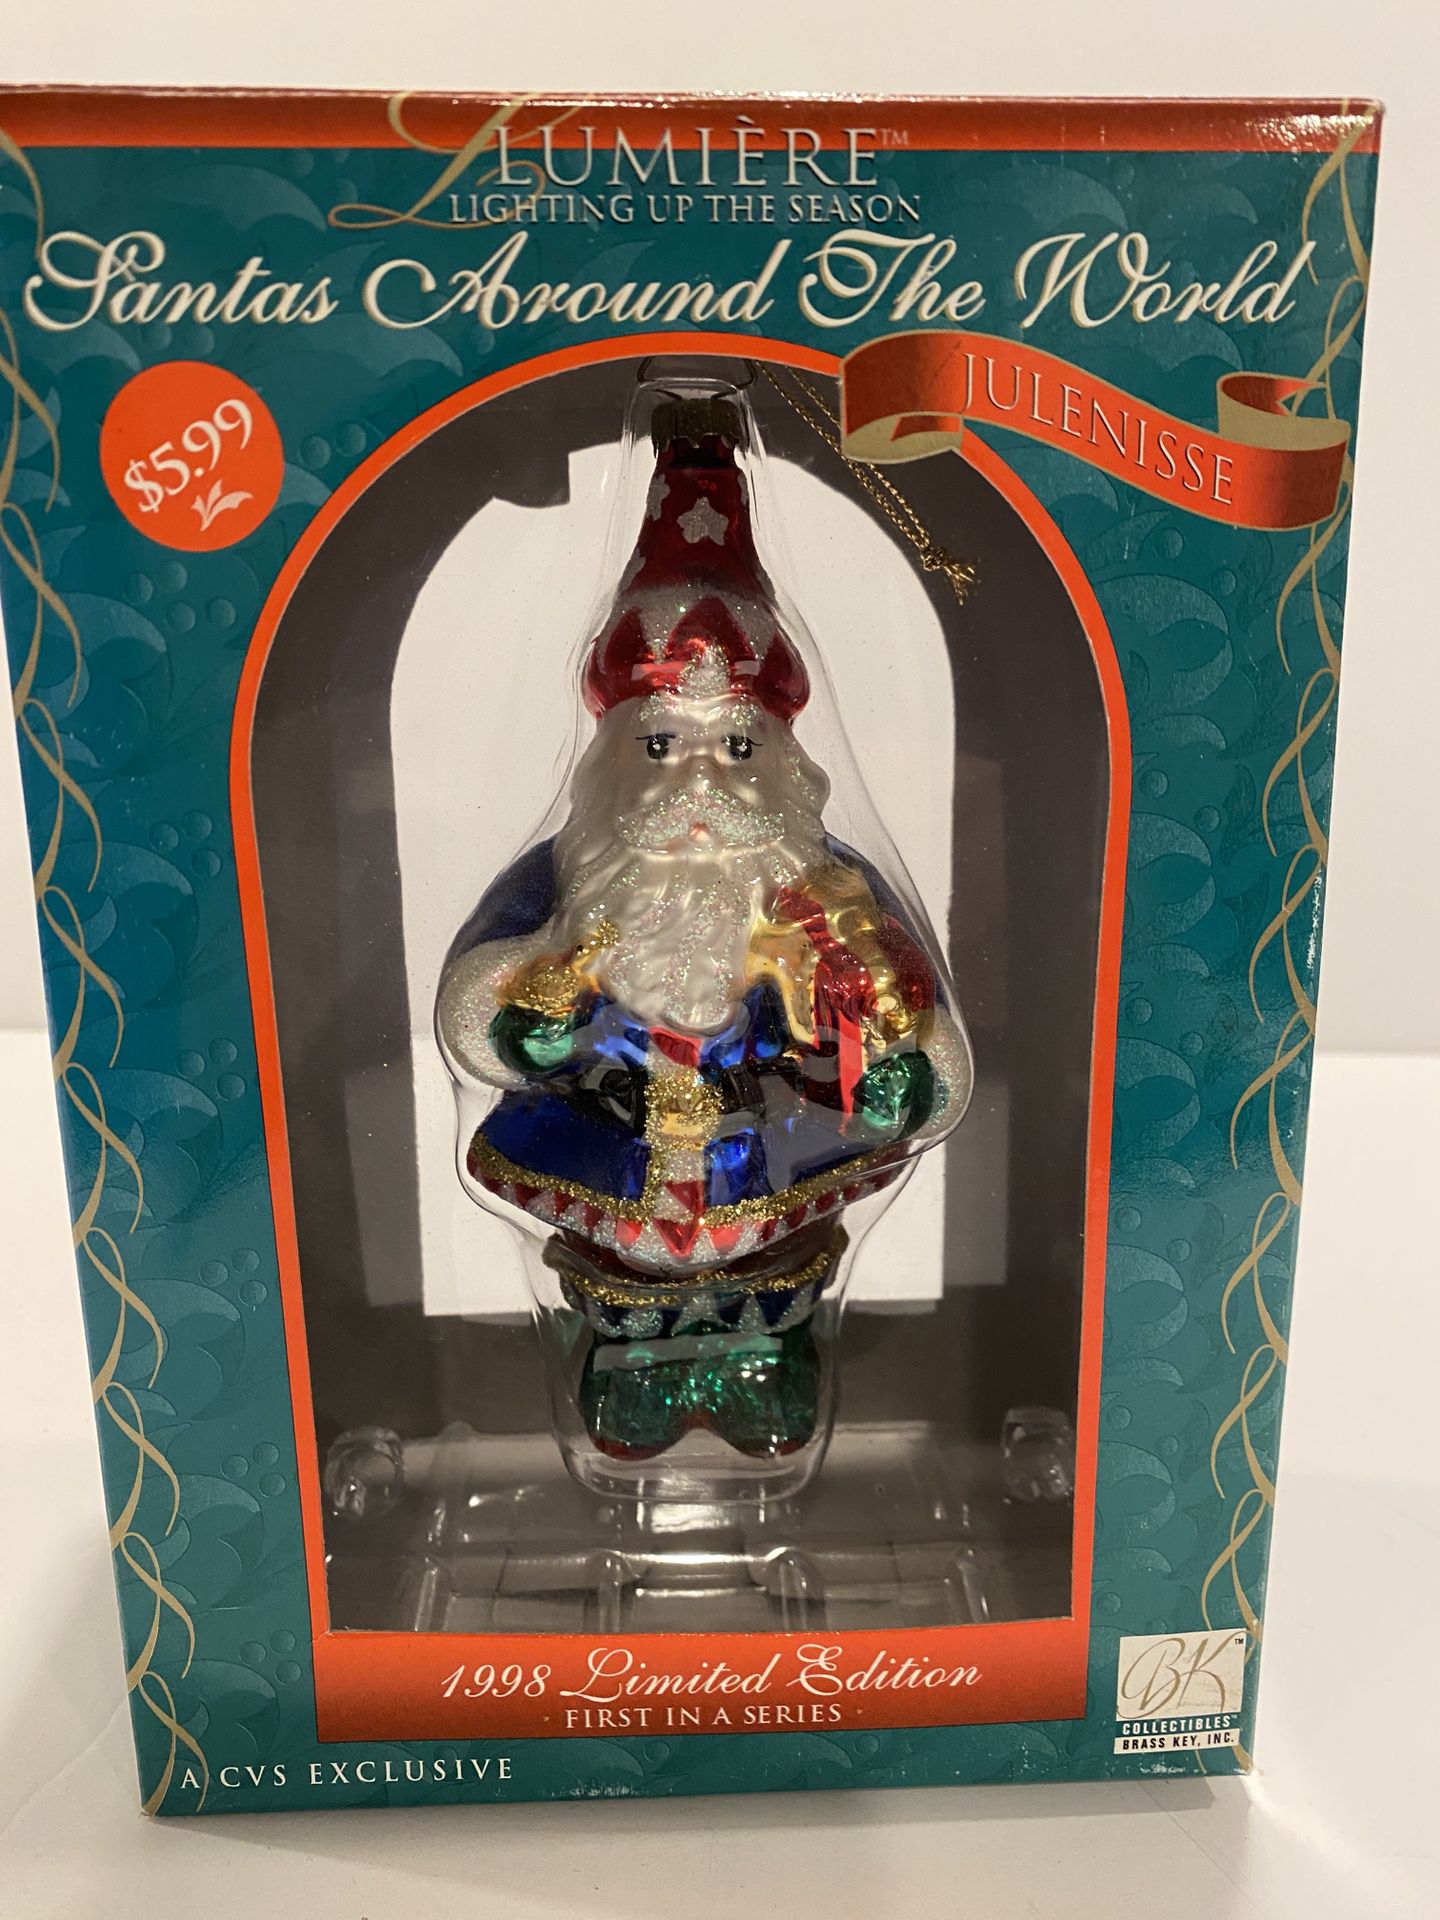 Vintage CVS 1998 Limited Edition Lumiere Santas Around the World Father Christmas